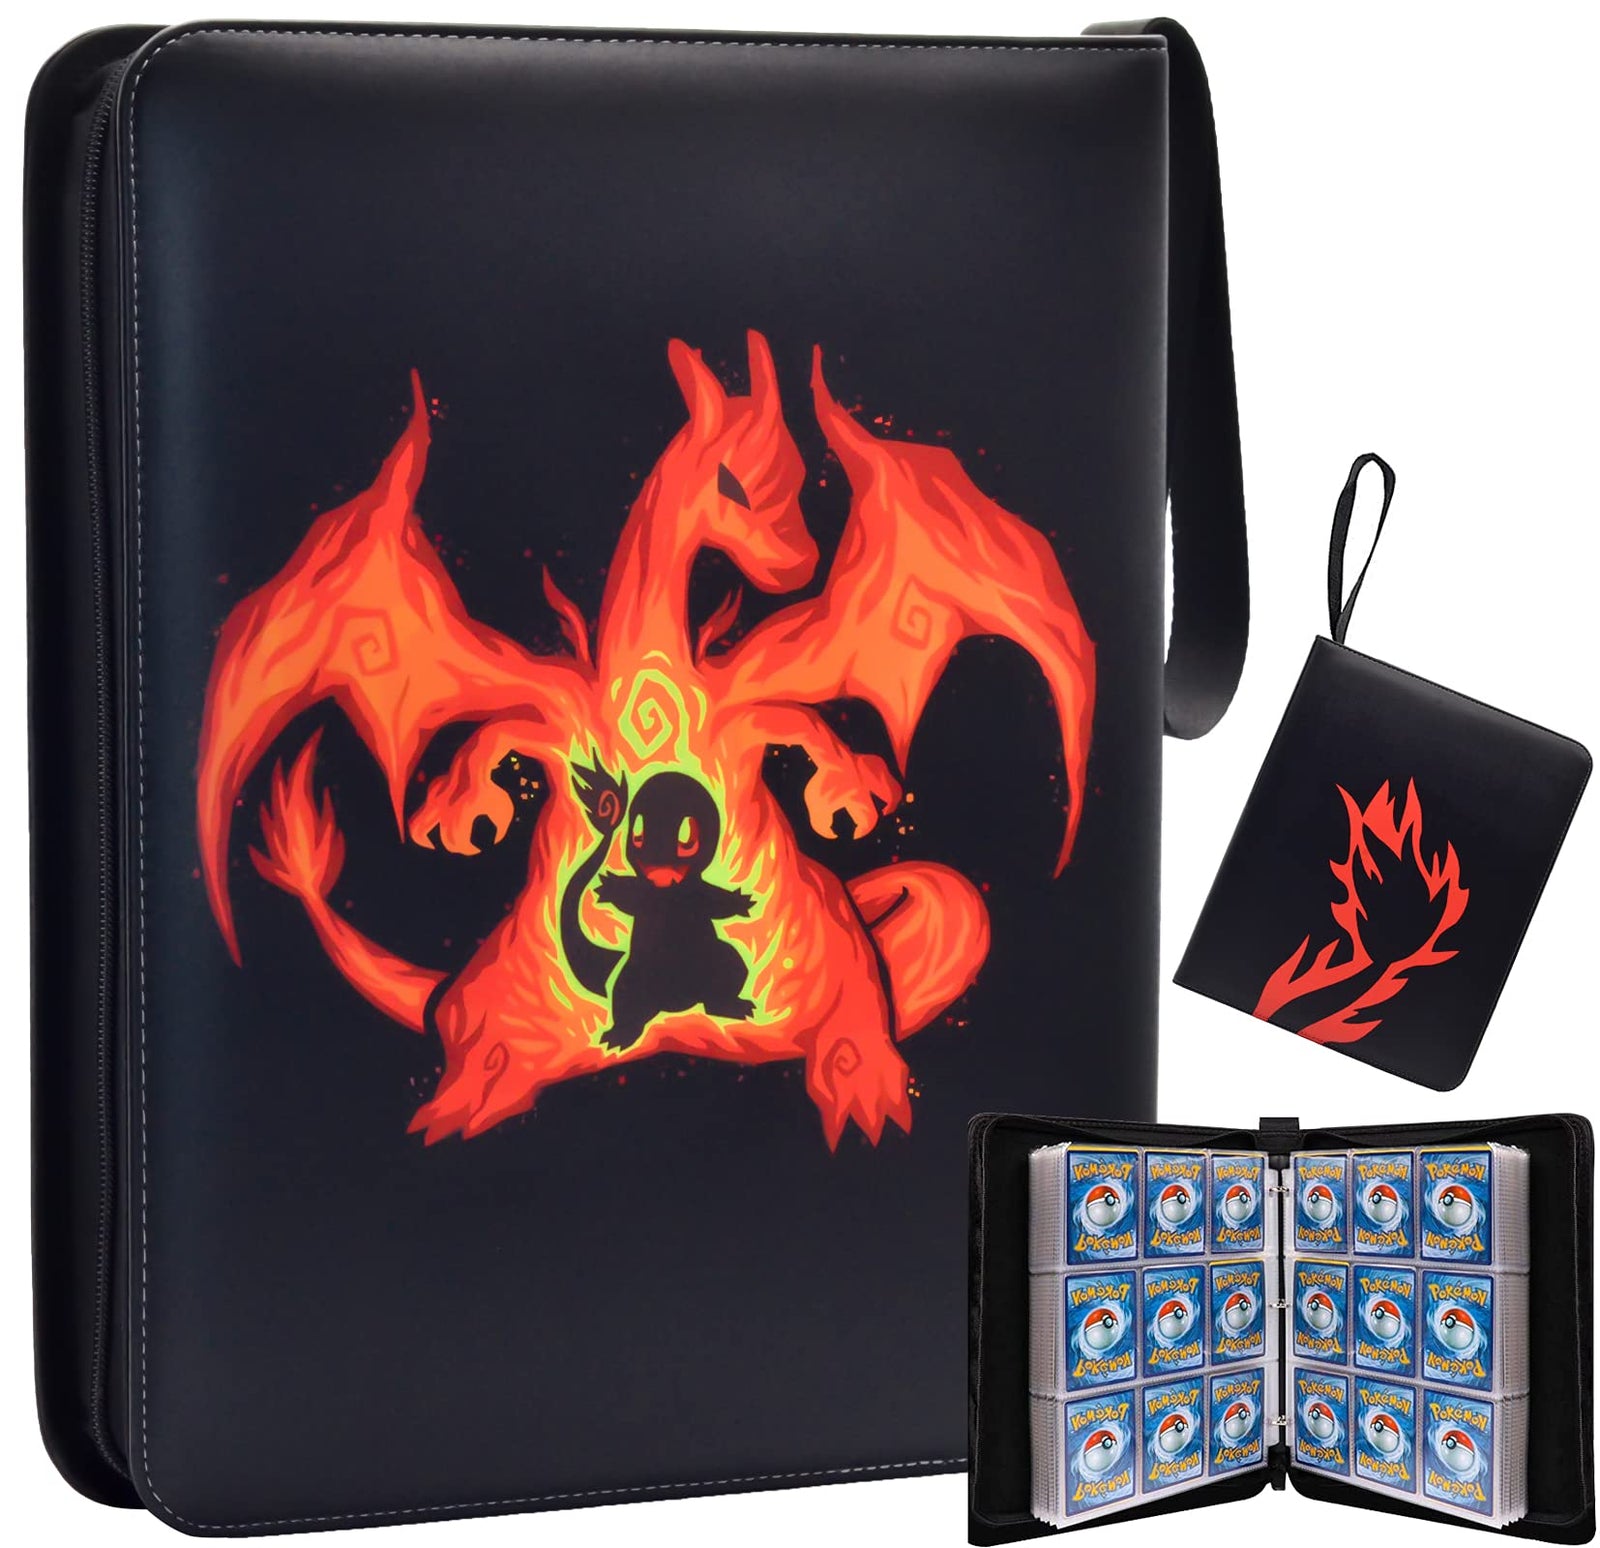 Card Binder for Pokemon Cards, CHELSOND 9-Pocket Portable Card Collector Album Holder Book Fits 720 Cards with 40 Removable Sleeves, Trading Card Binder Display Storage Carrying Case for TCG-Dragon